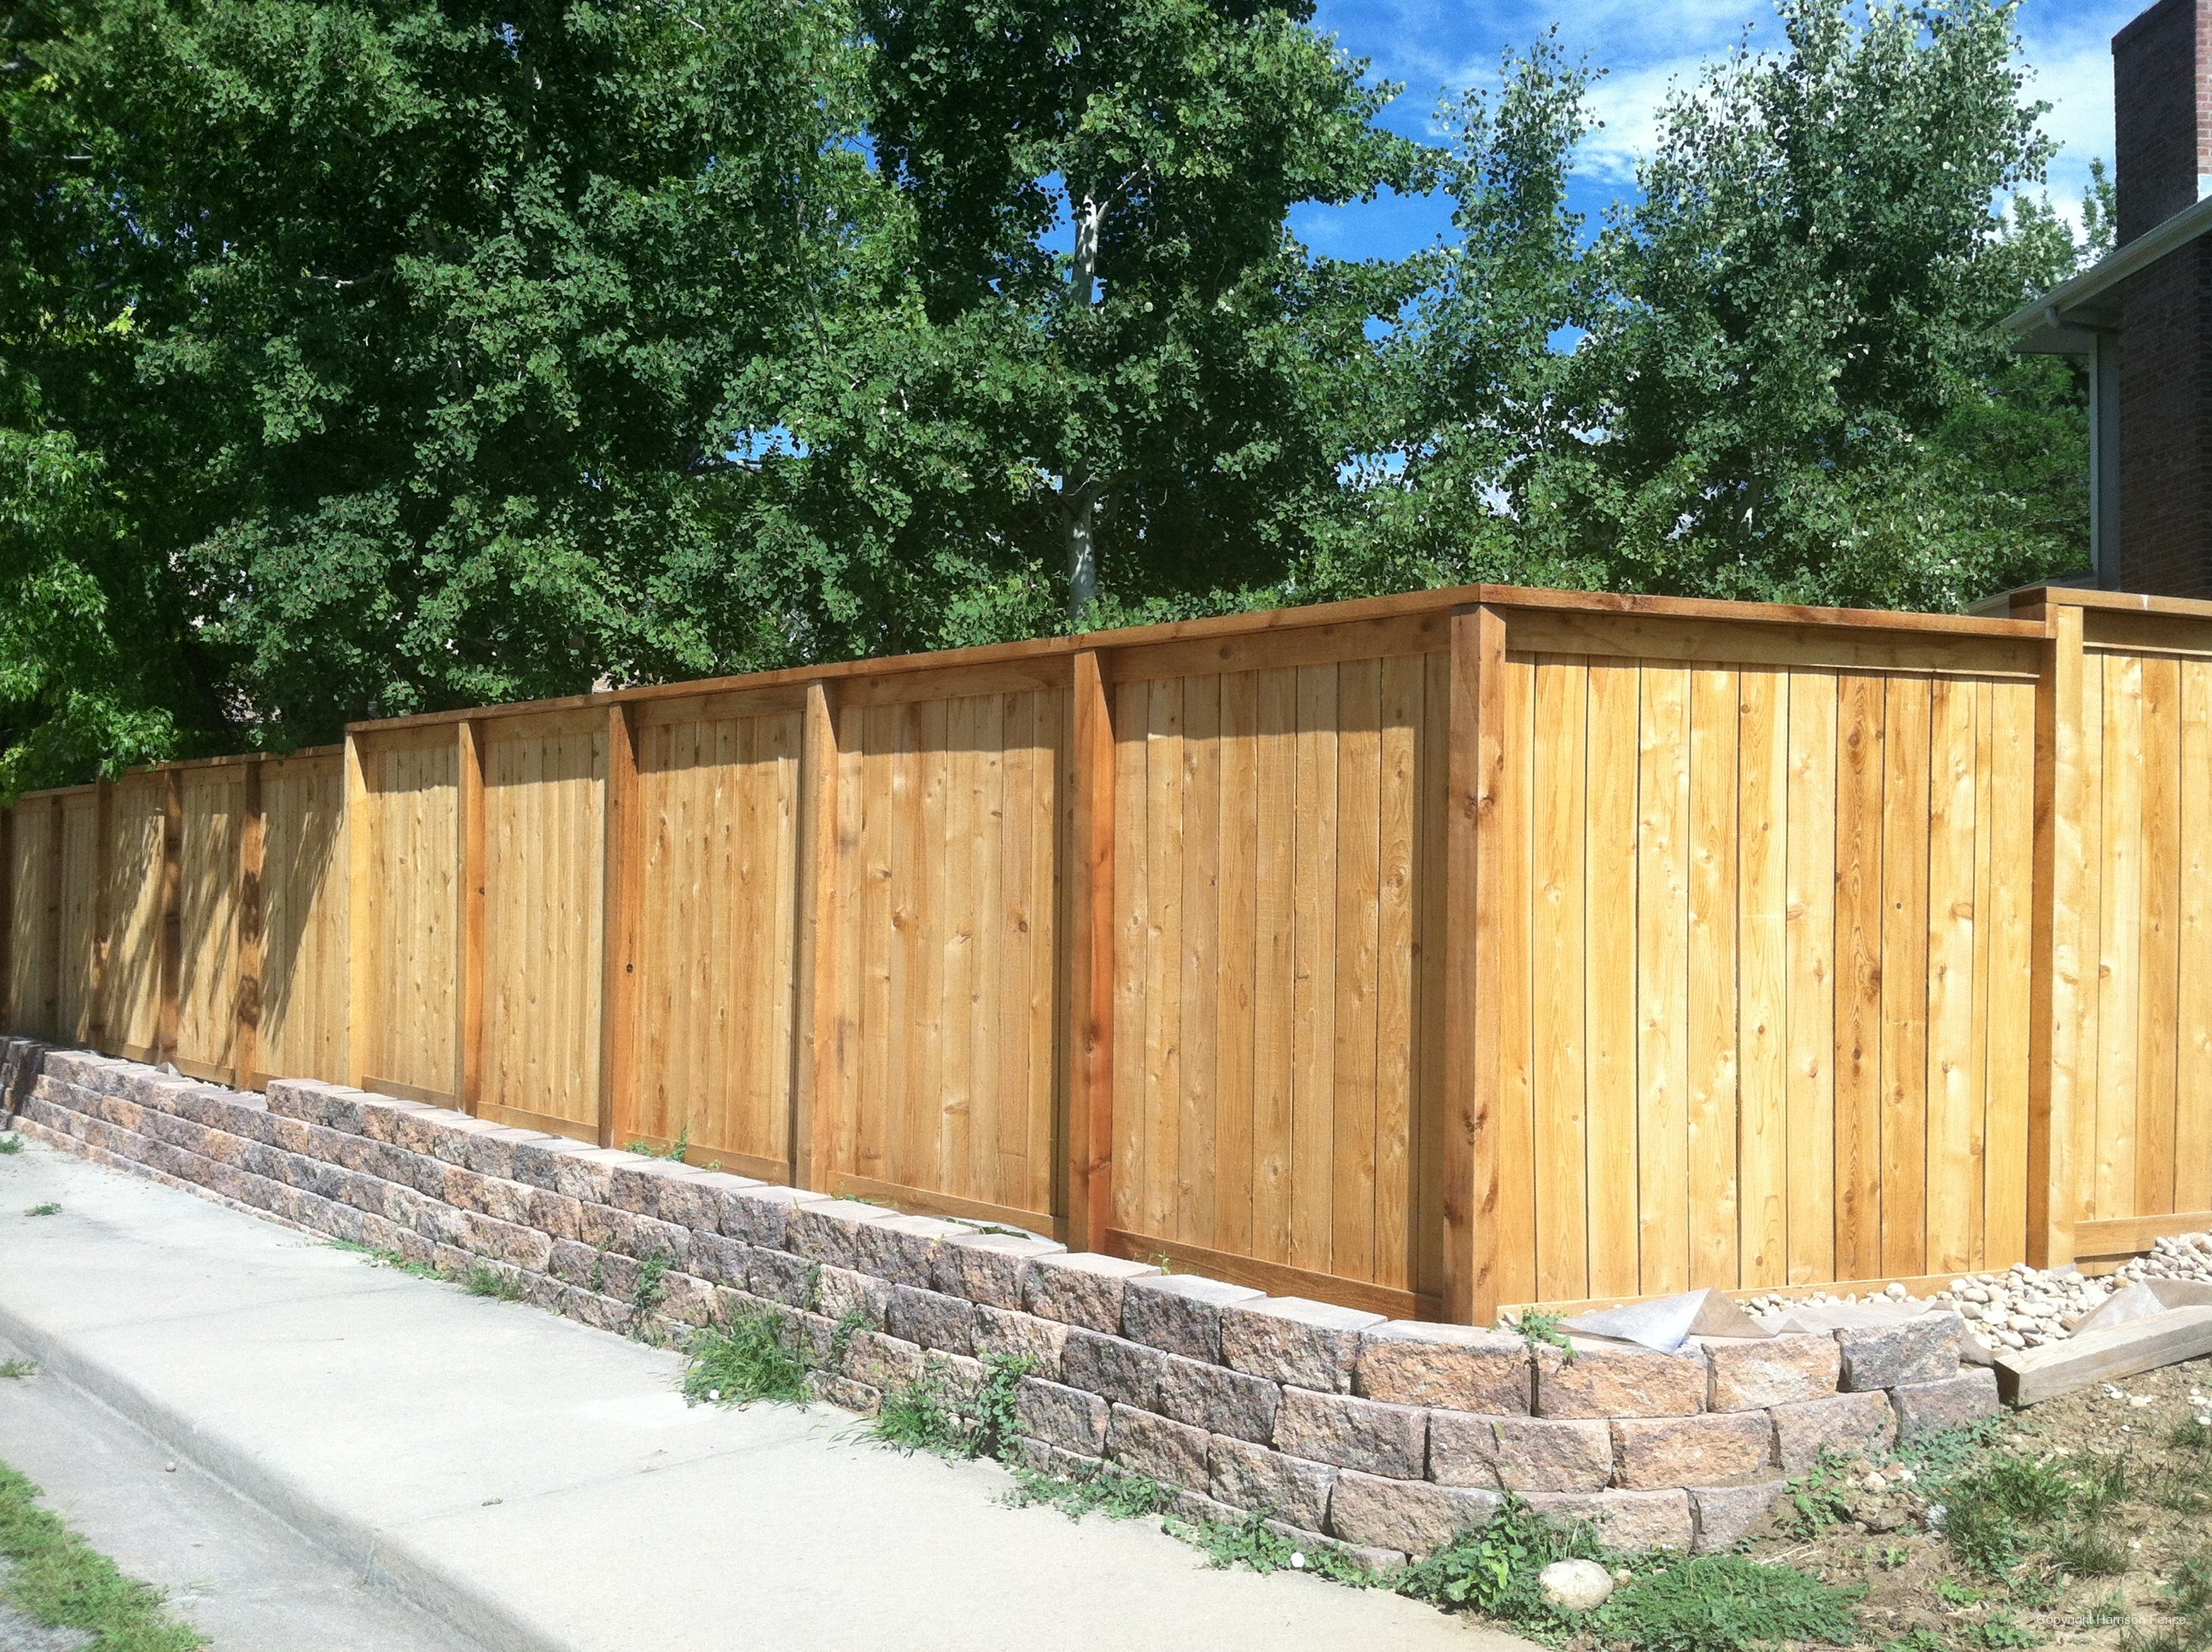 Wood Privacy Fences Harrison Fence intended for sizing 2592 X 1936